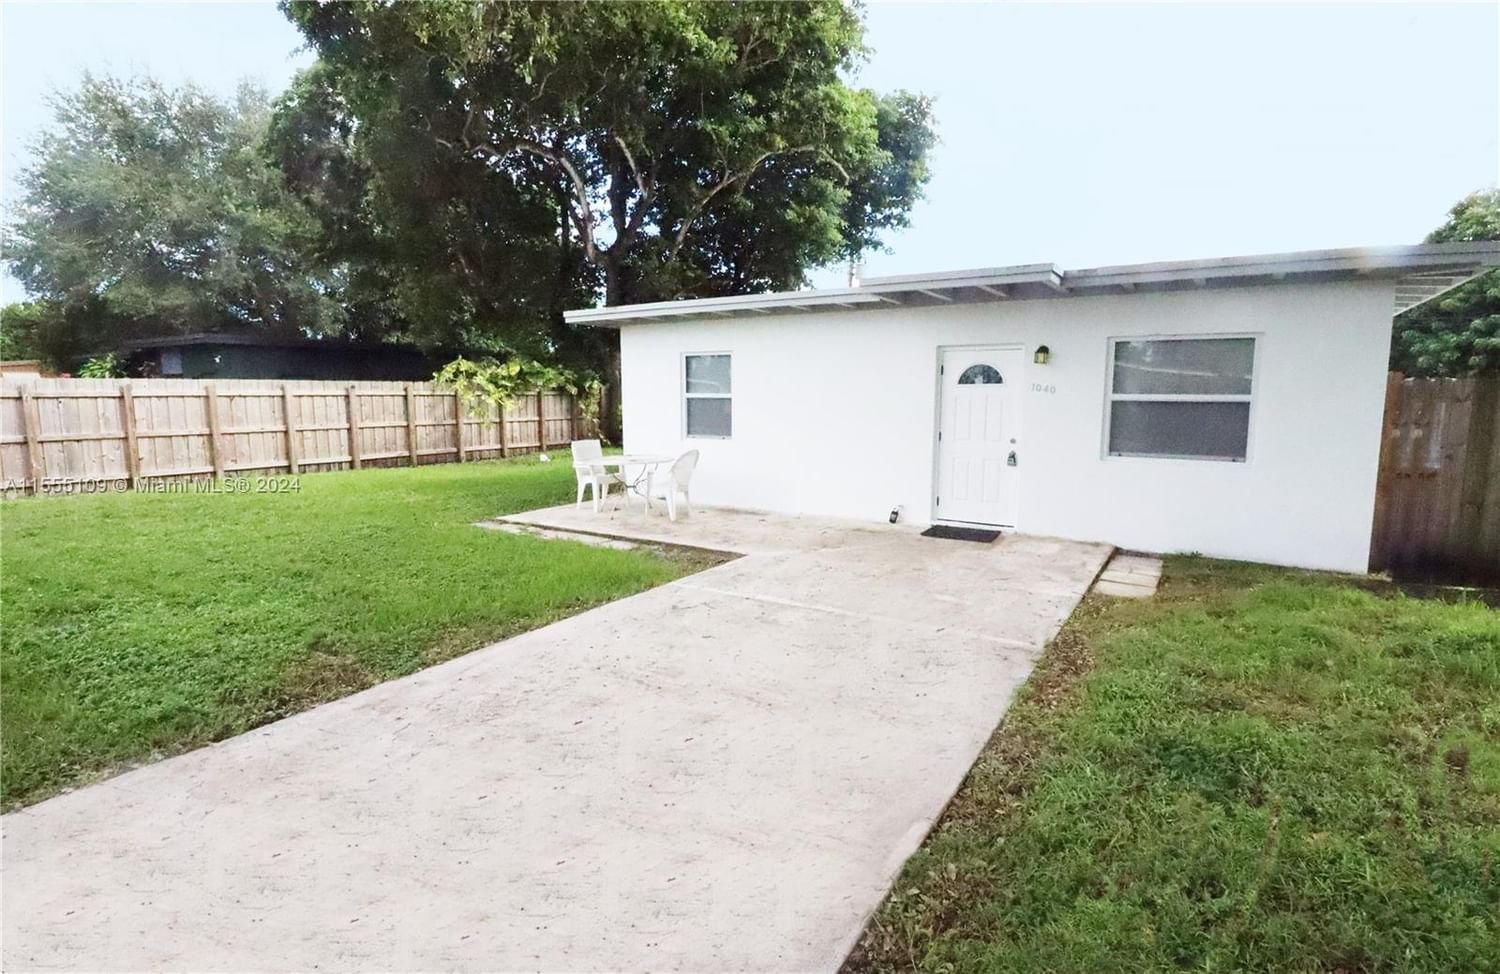 Real estate property located at 1040 141st St, Miami-Dade County, HYDE PARK MANOR, Miami, FL